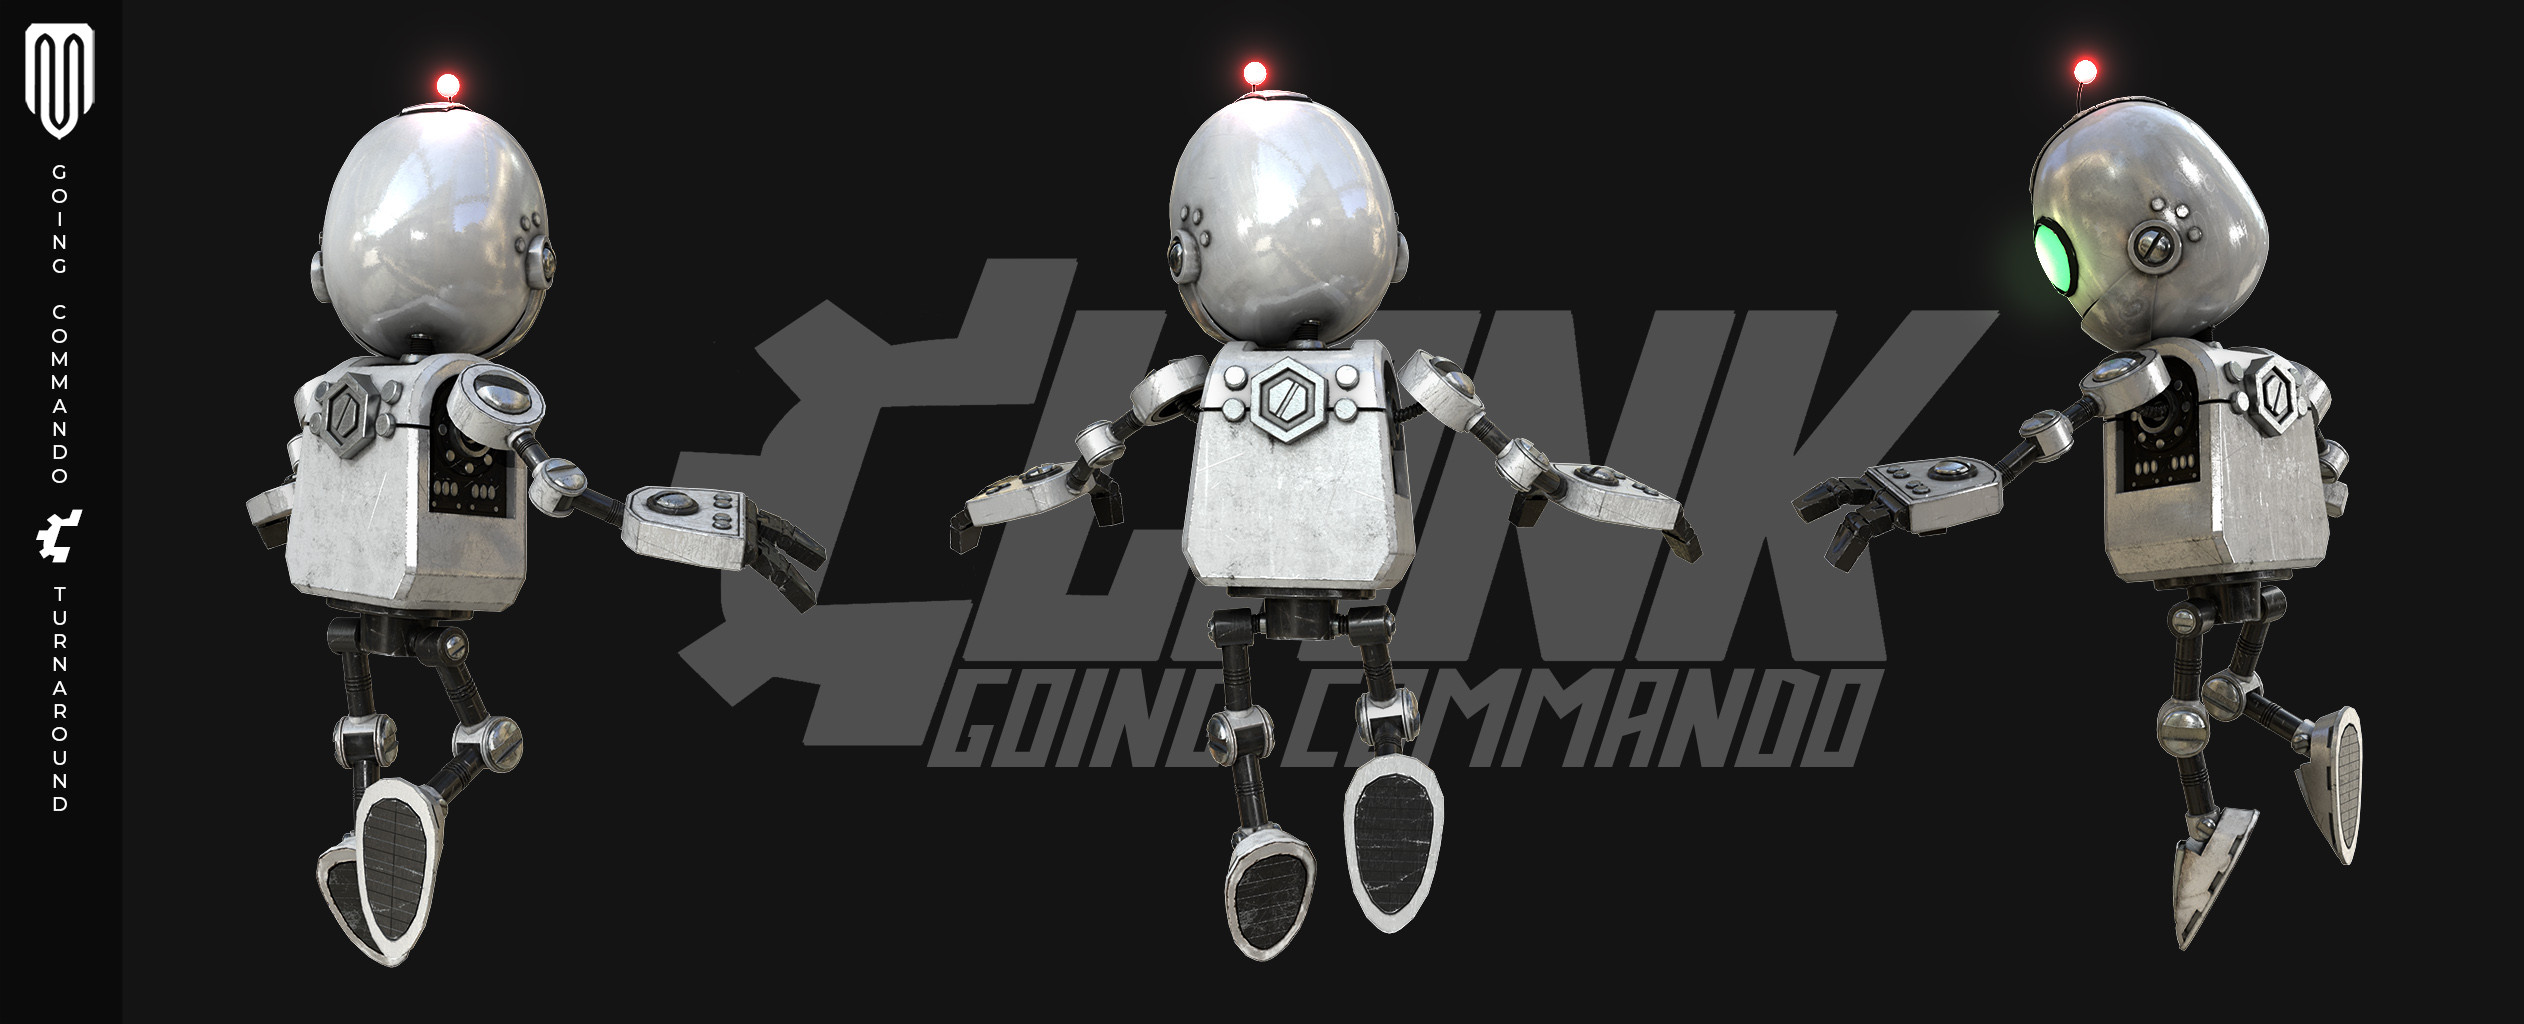 Games - Ratchet Clank Going Commando 1, GAMES_13025. 3D stl model for CNC